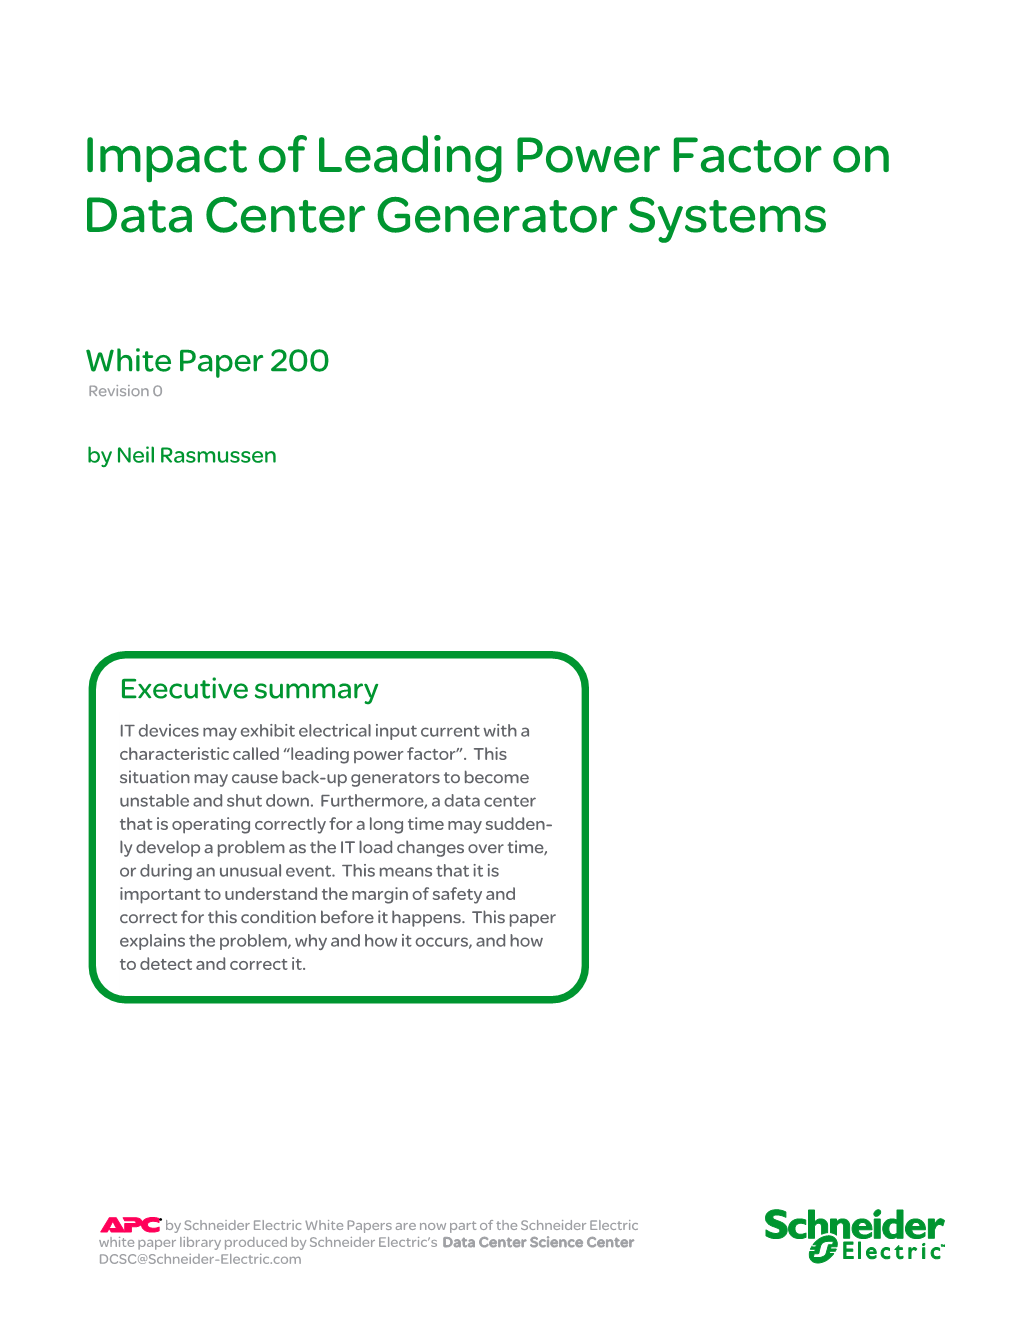 Impact of Leading Power Factor on Data Center Generator Systems